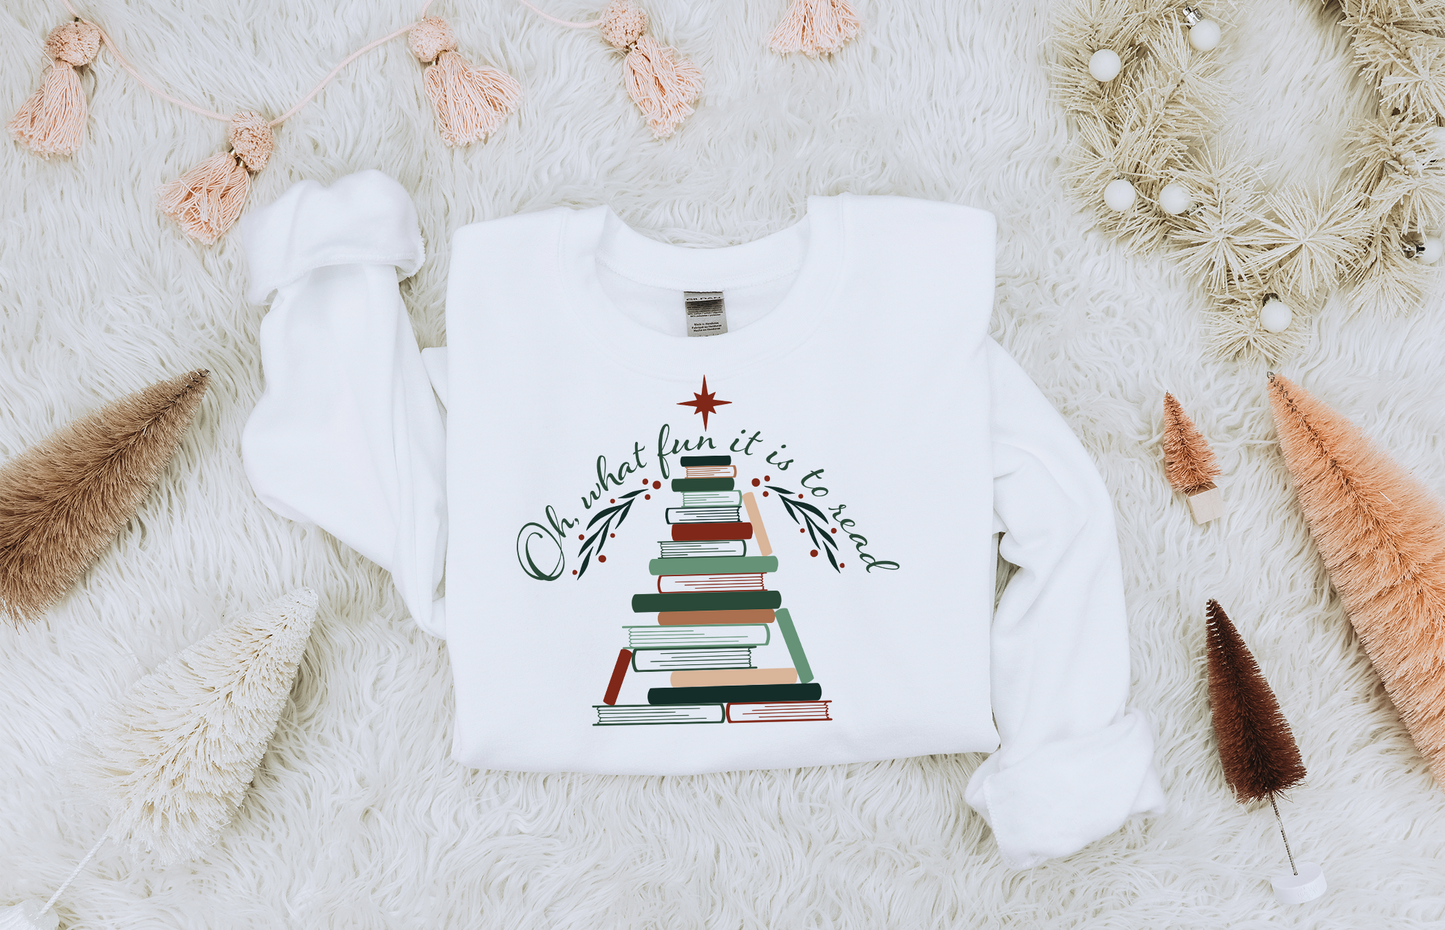 oh what fun it is to read (book tree) sweatshirt